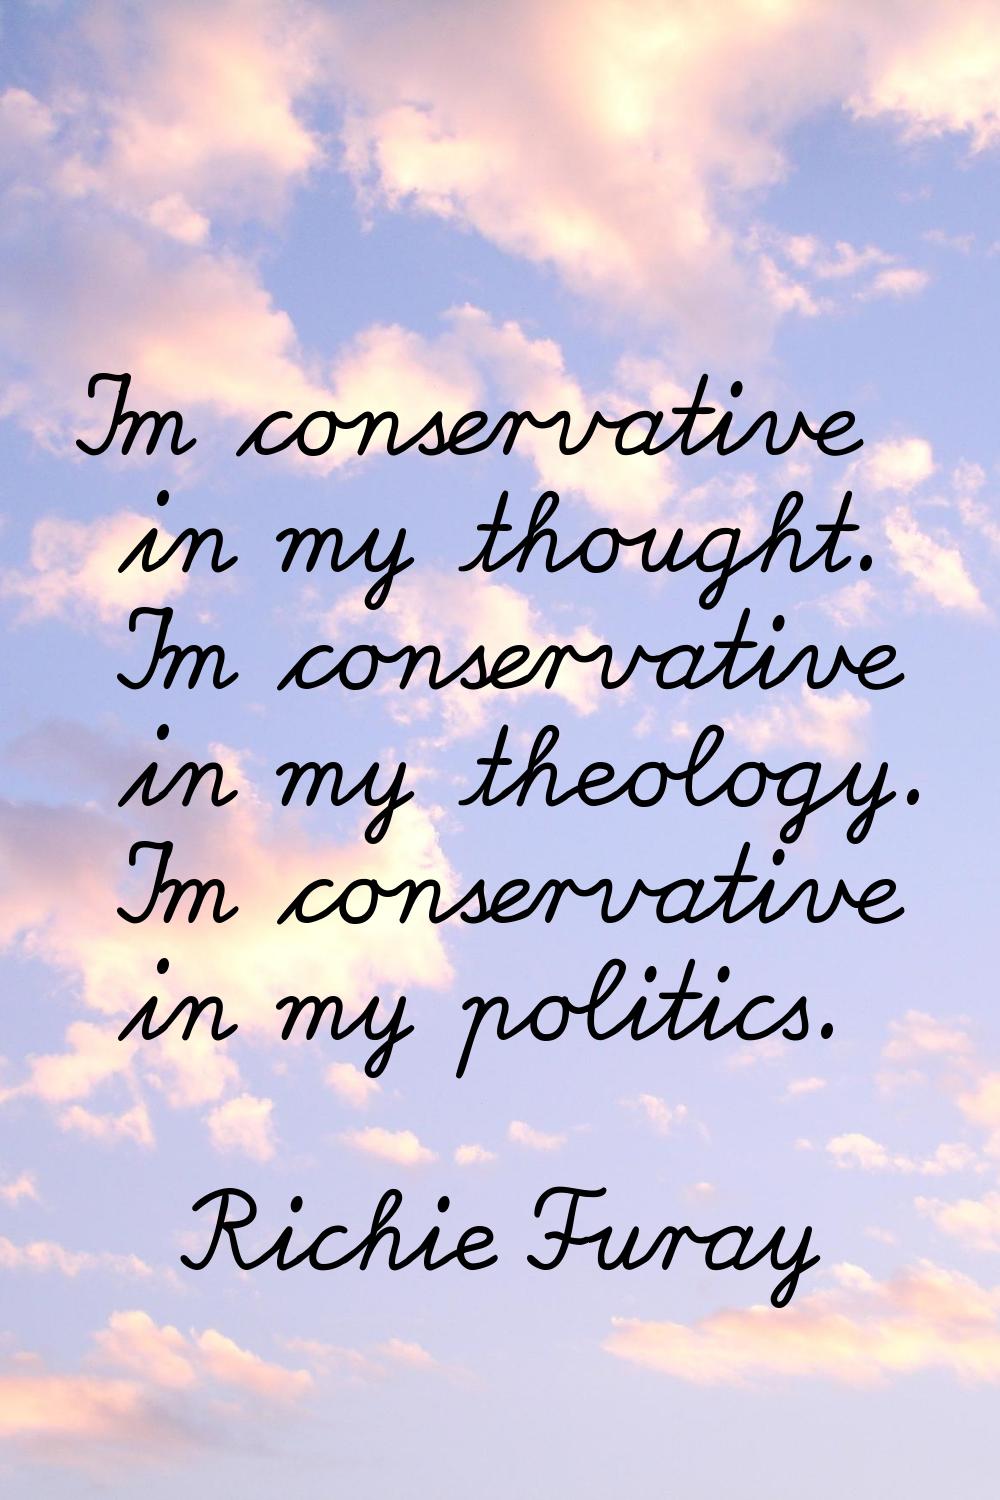 I'm conservative in my thought. I'm conservative in my theology. I'm conservative in my politics.